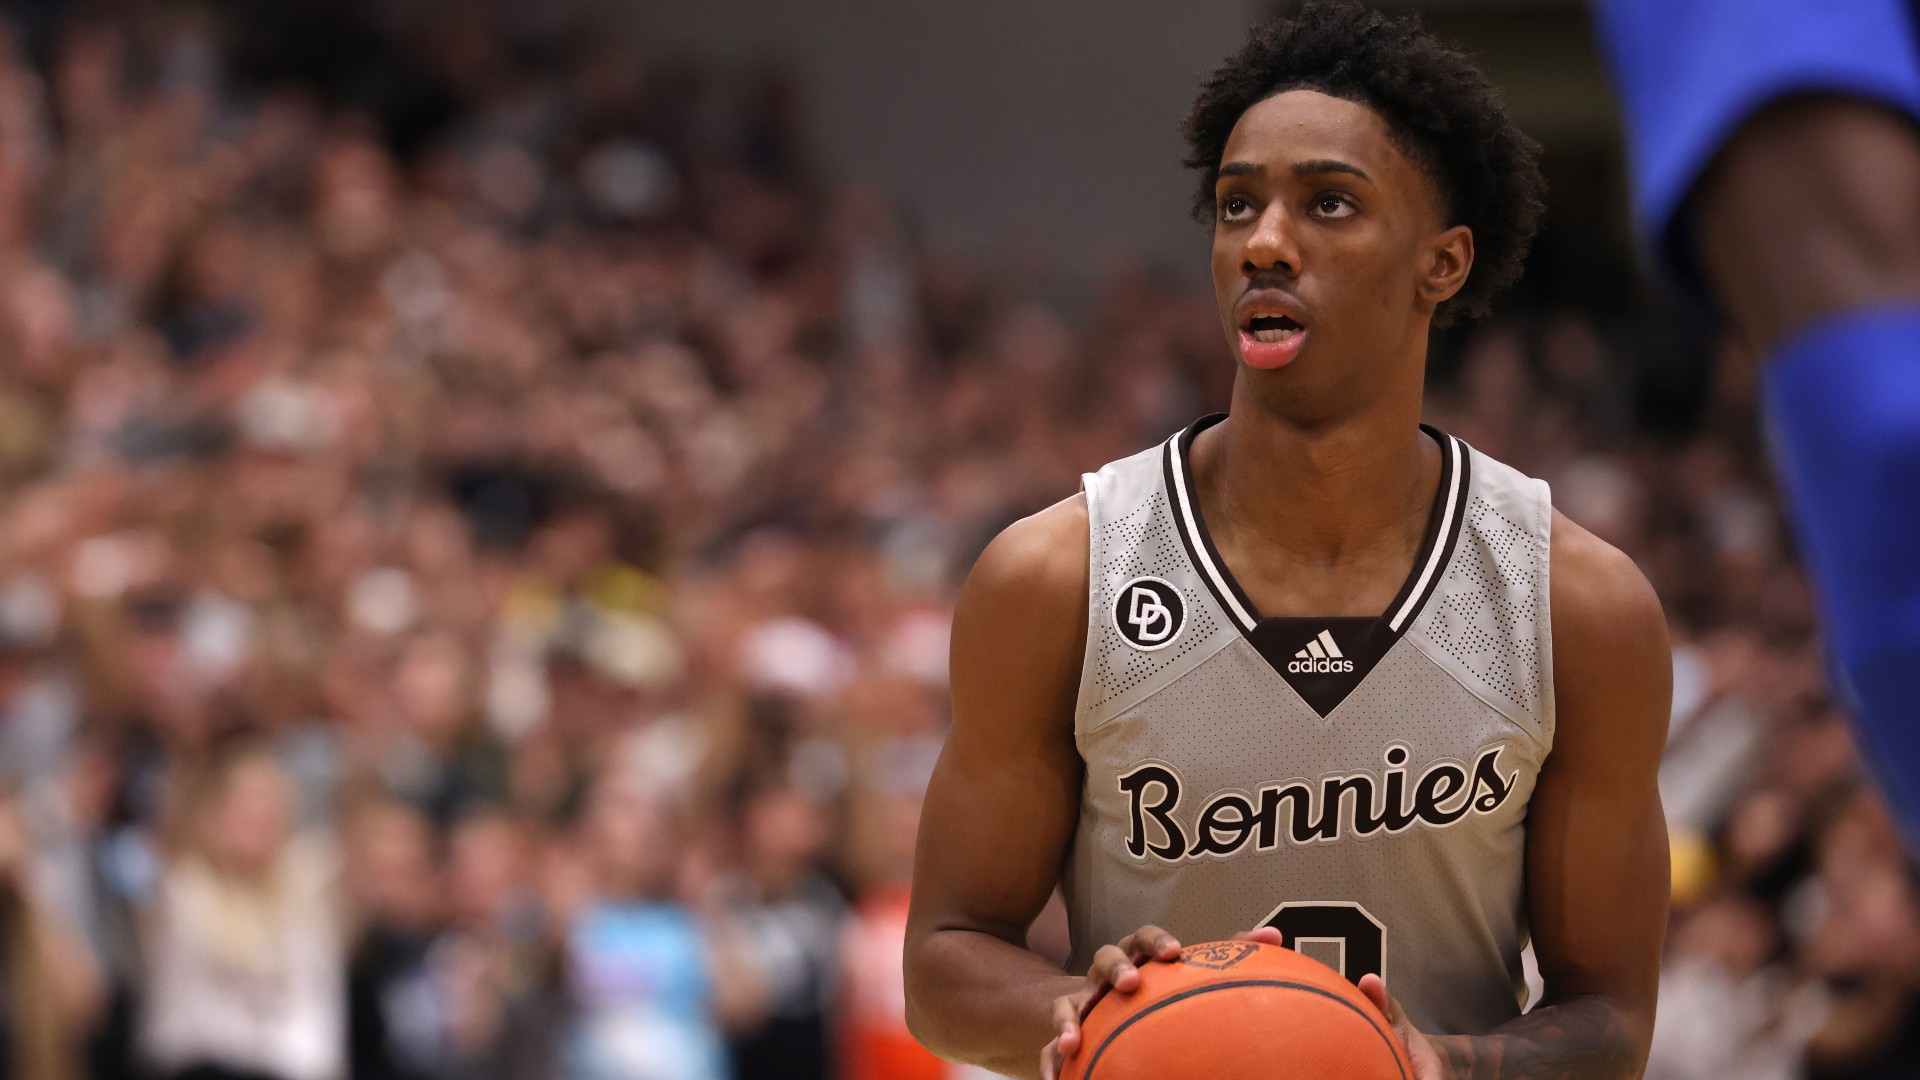 Friday College Basketball Odds, Picks, Predictions: 3 Under-the-Radar Games Sharp Bettors Are Targeting, Including VCU vs. St. Bonaventure (Jan. 14) article feature image